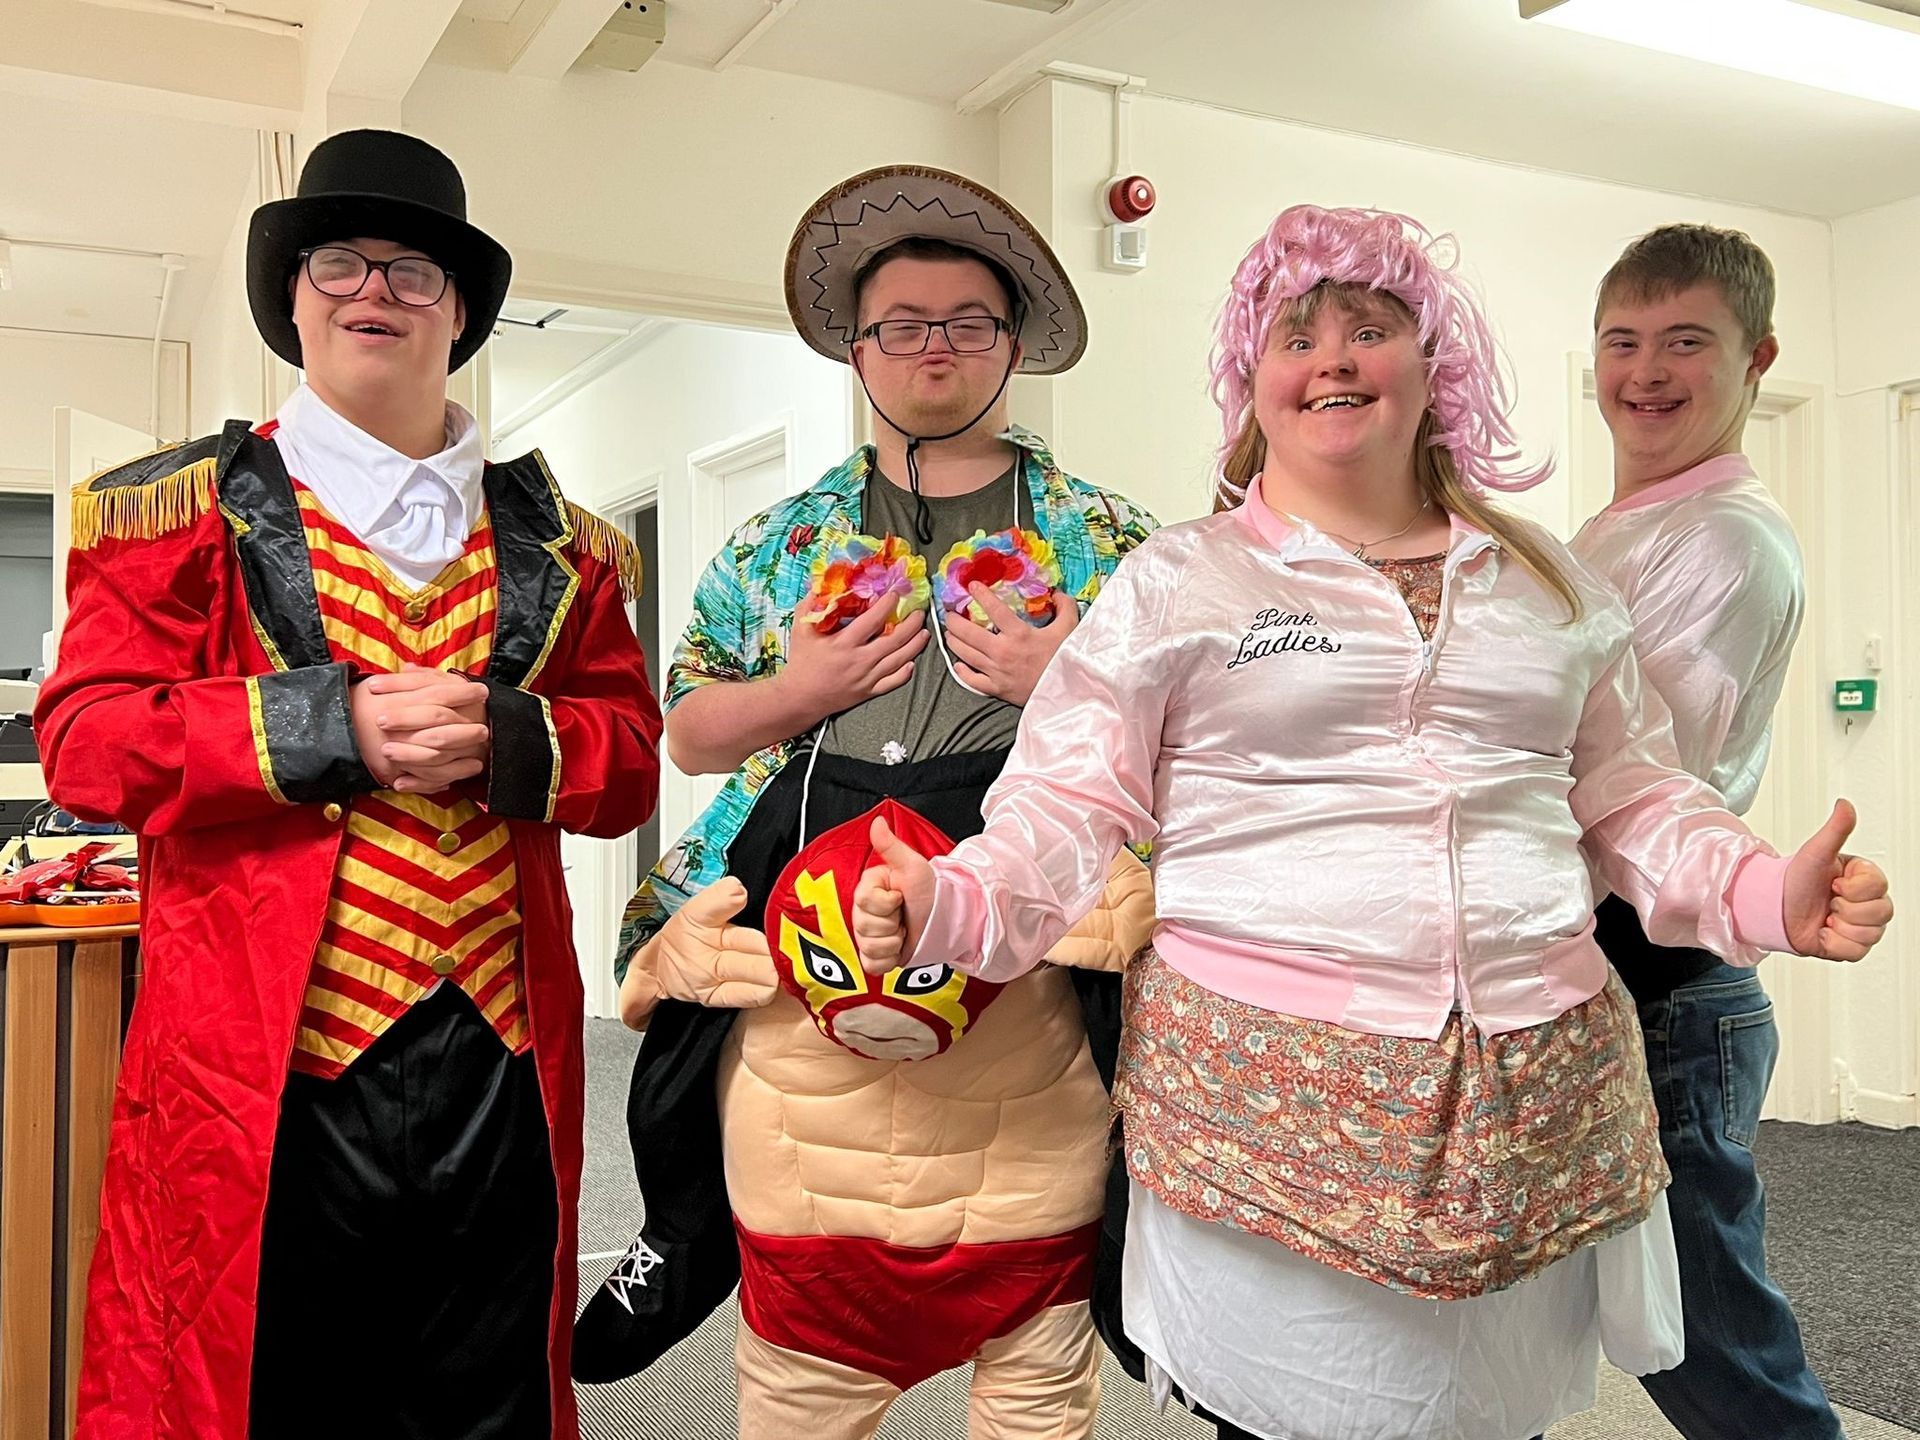 a group of people dressed in costumes are posing for a picture .